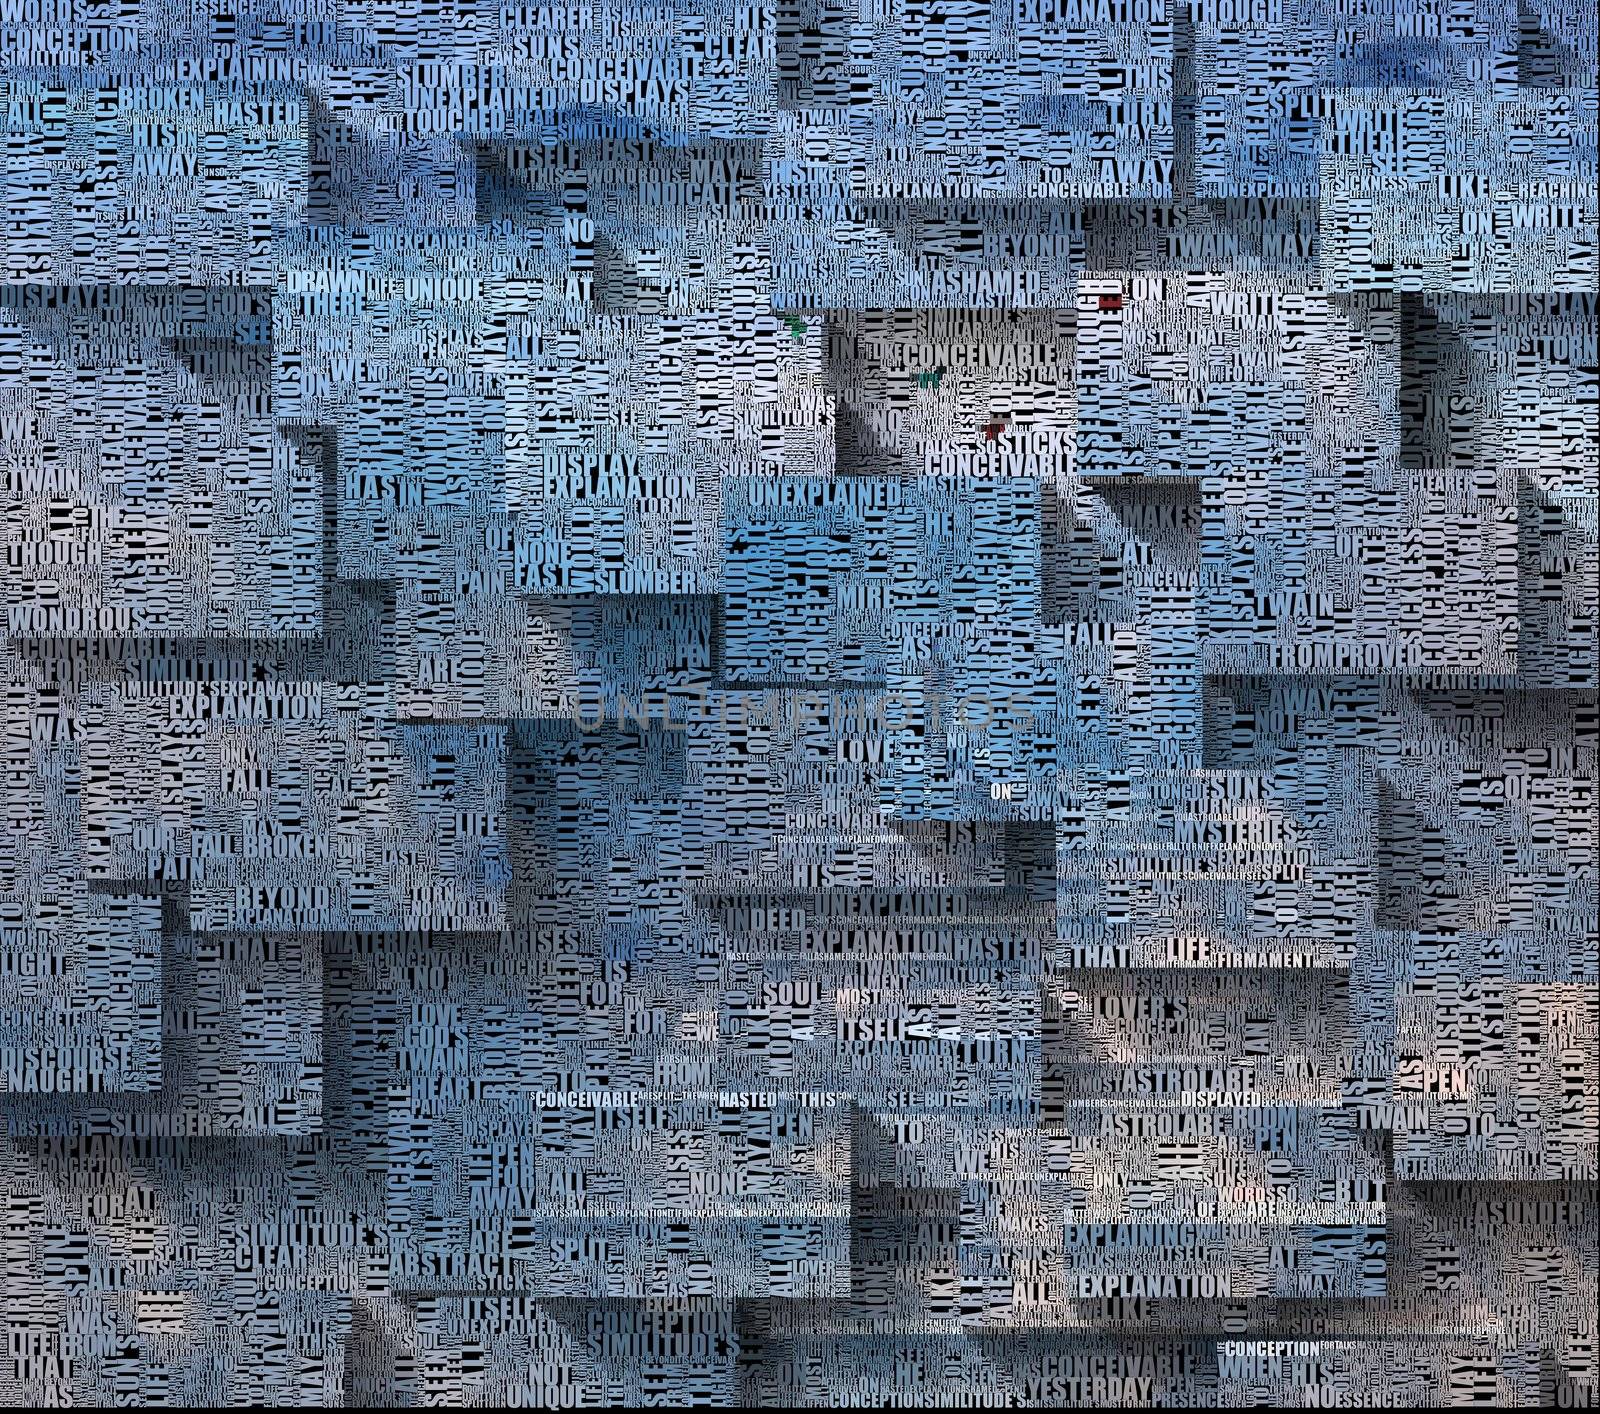 Abstract blocks in blue colors with words and butterflies.